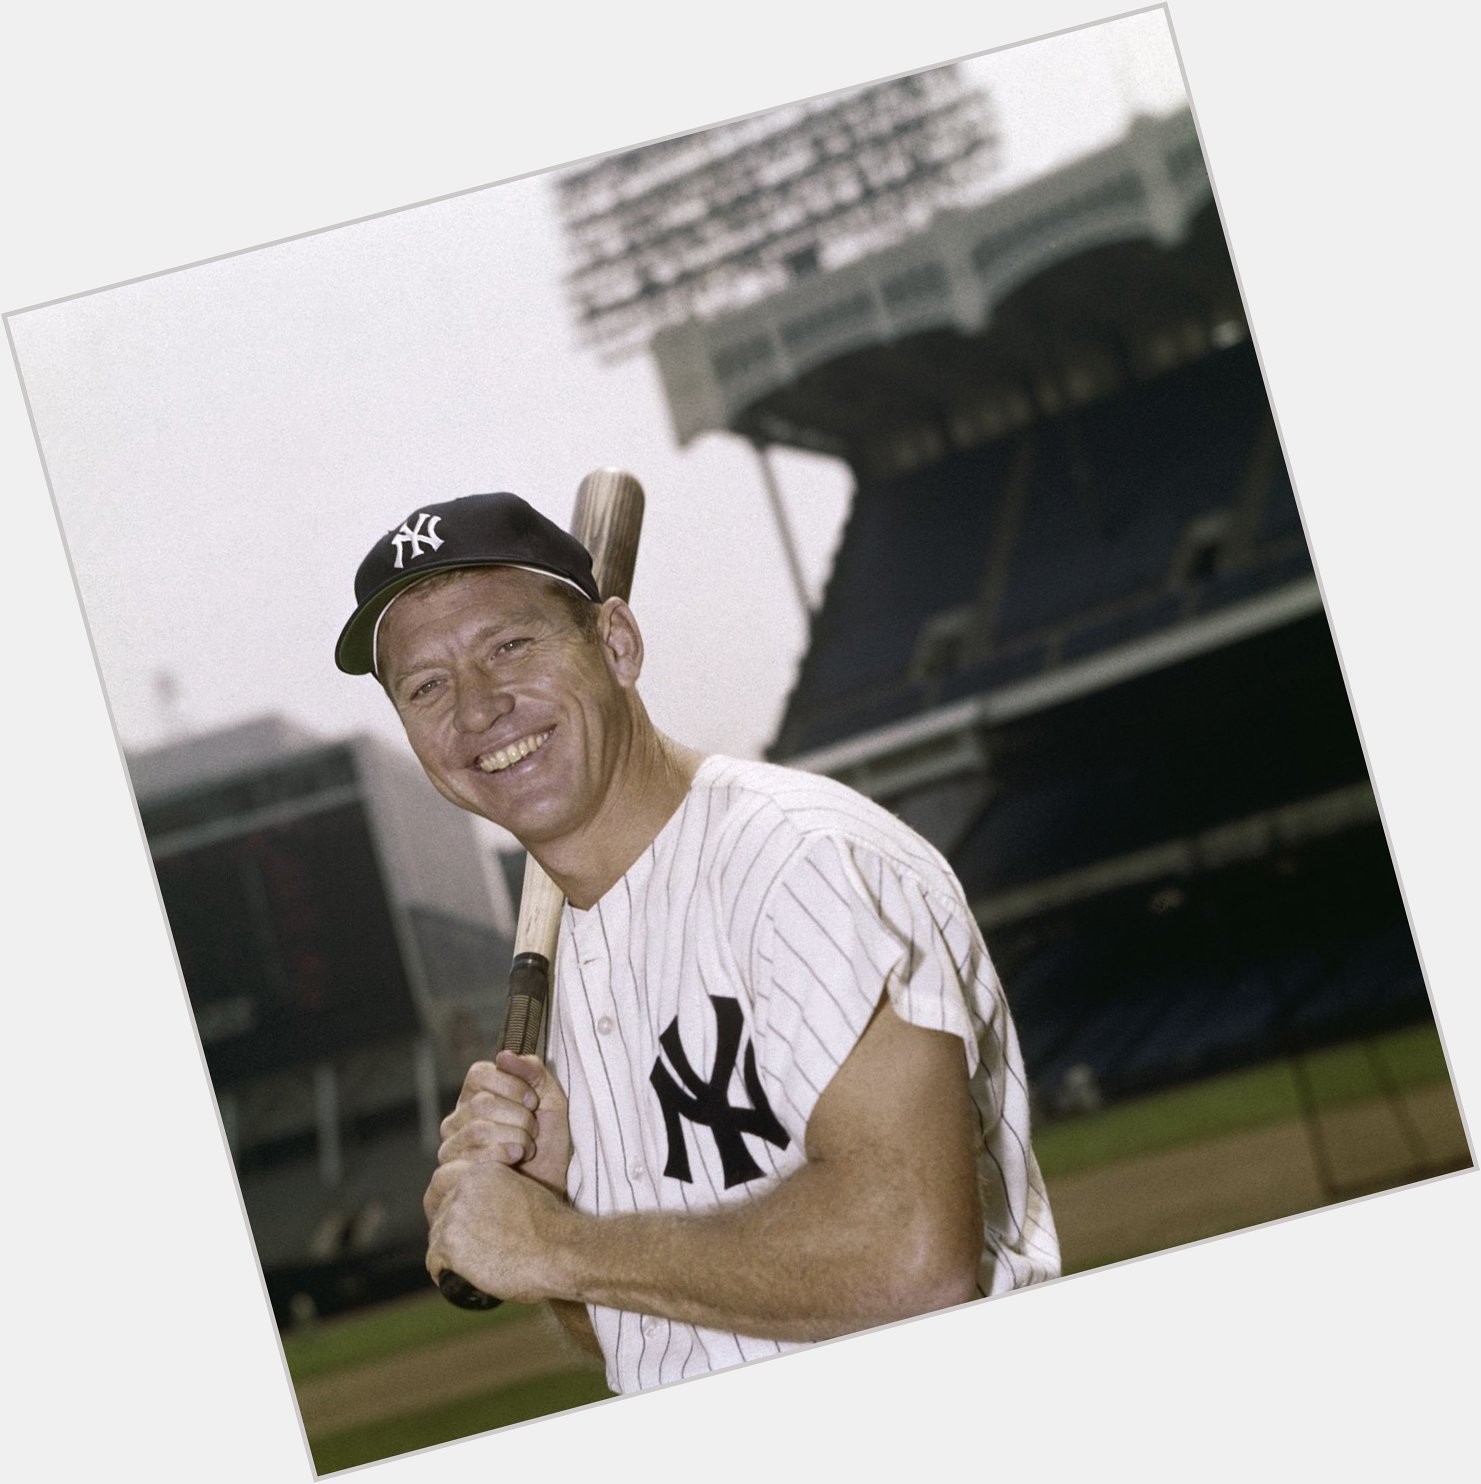 Happy birthday to one of the greatest to ever take the field, Mickey Mantle! He would have been 86 today. 